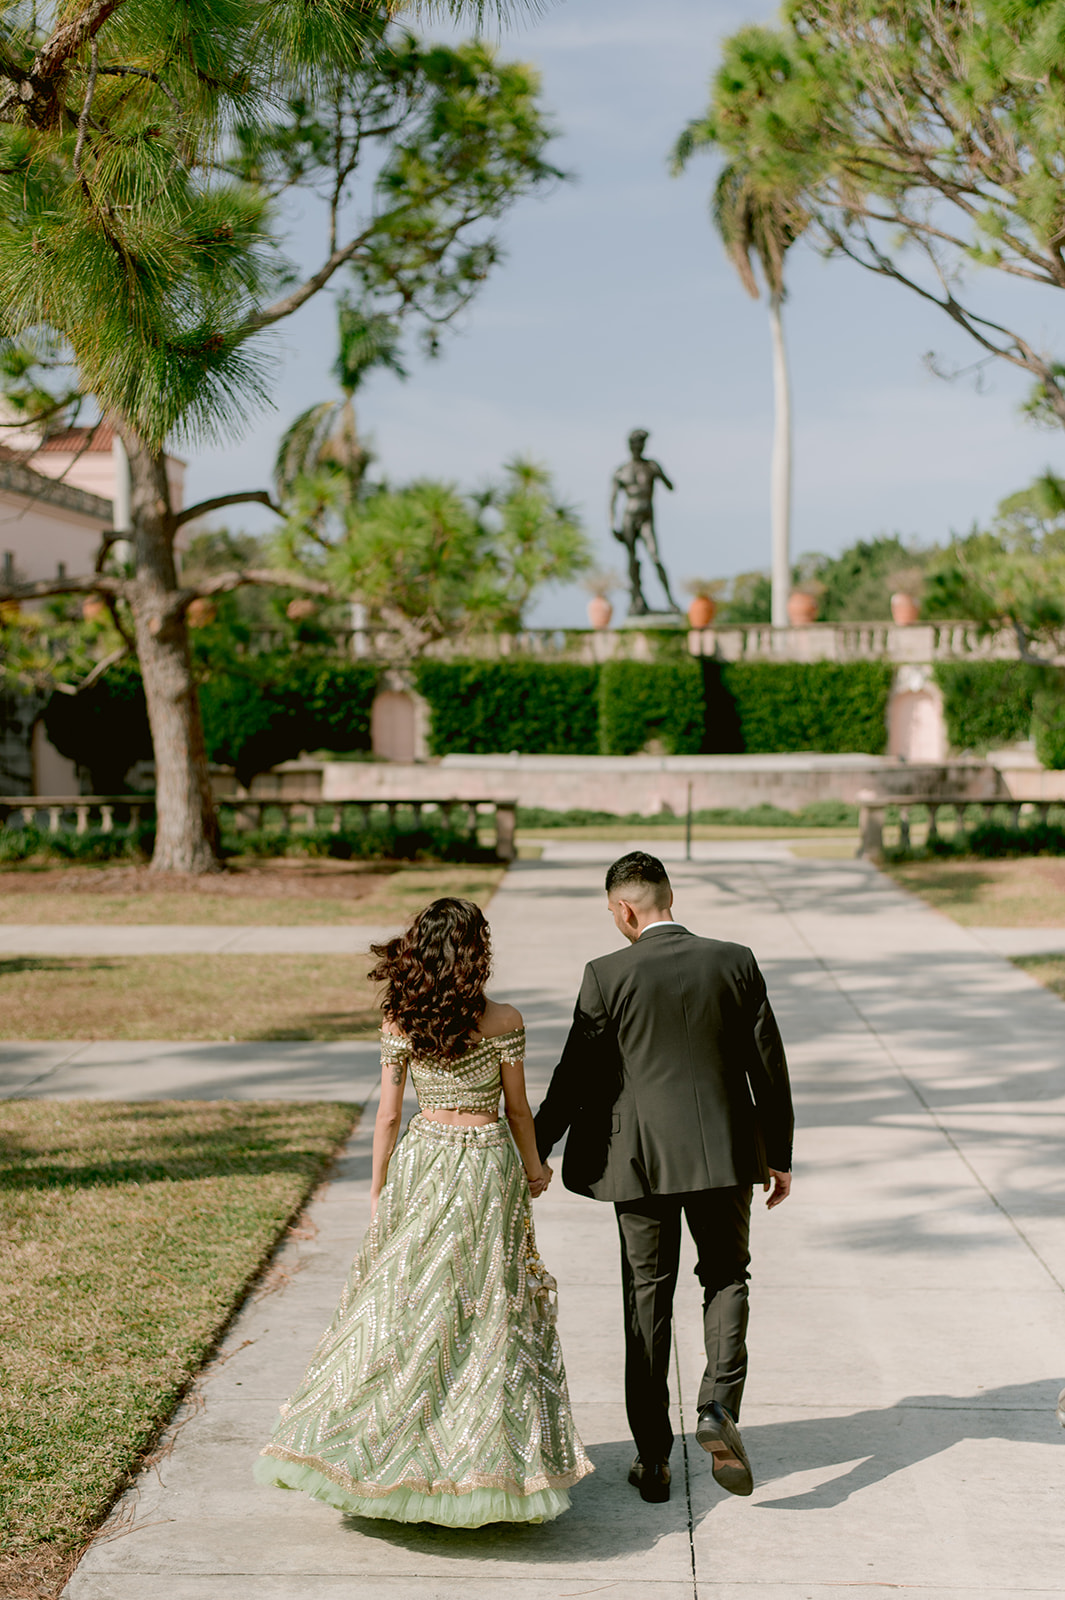 "Ringling Museum engagement shoot with Ca' d'Zan as a picturesque location"
